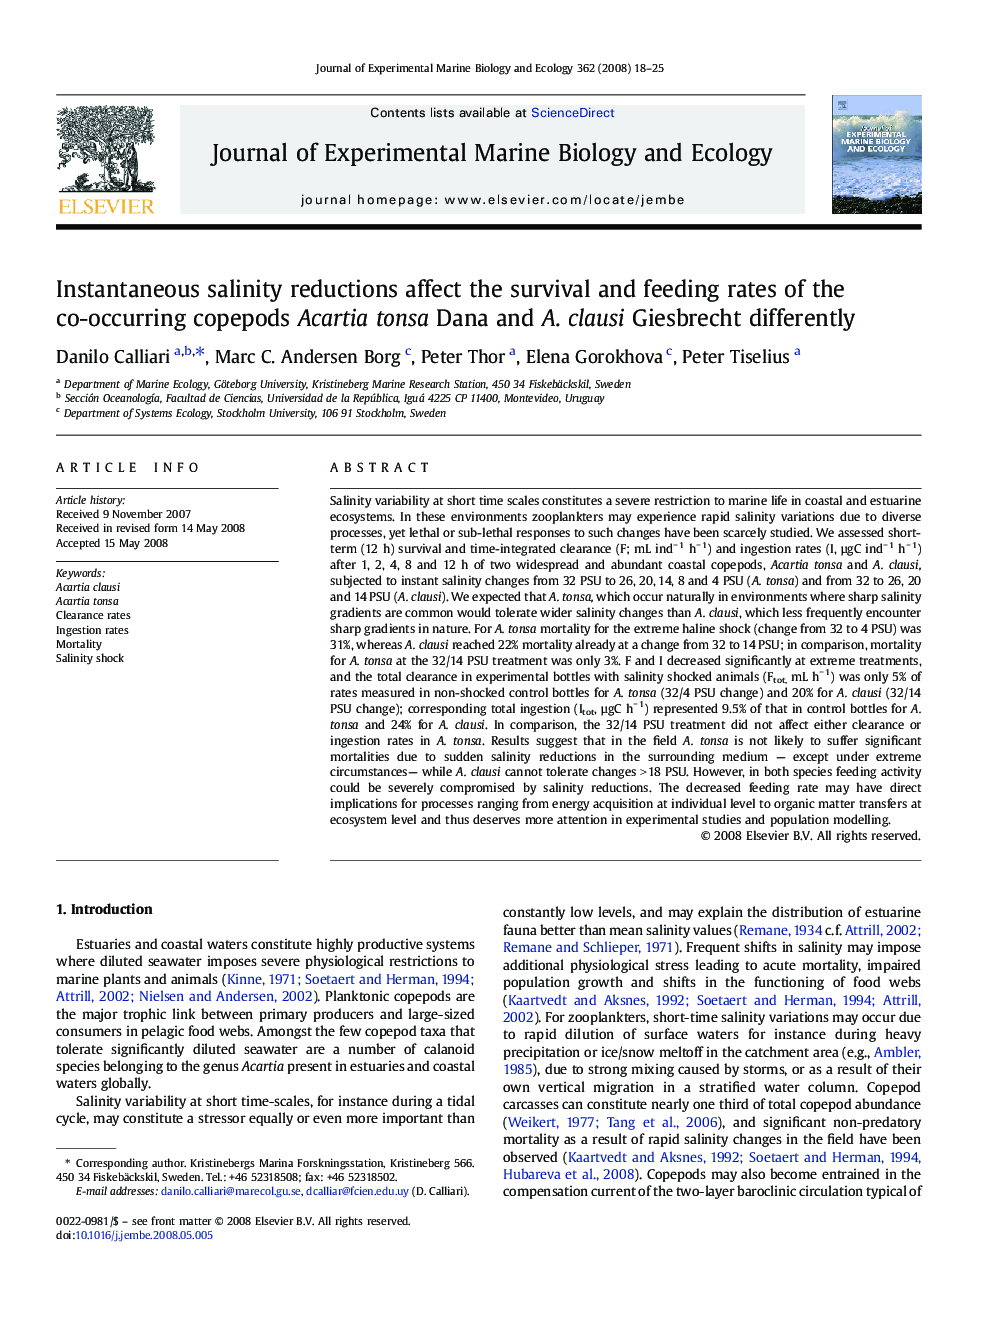 Instantaneous salinity reductions affect the survival and feeding rates of the co-occurring copepods Acartia tonsa Dana and A. clausi Giesbrecht differently